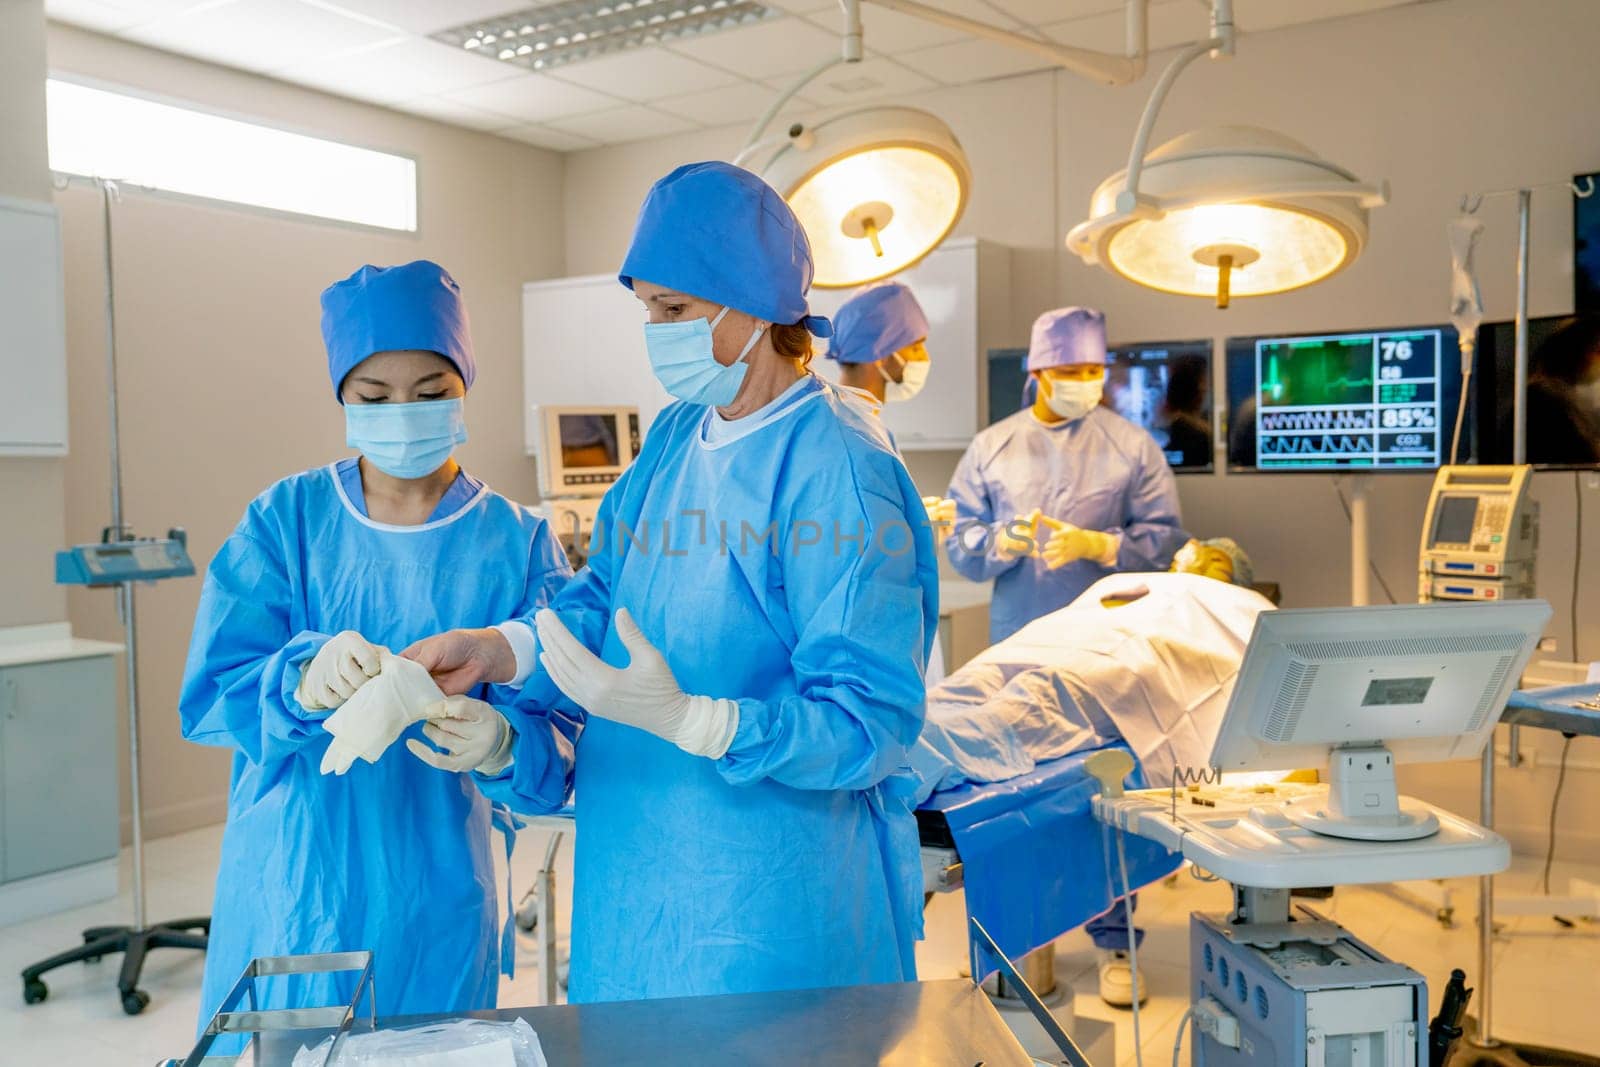 Professional nurse help the doctor to wear surgical gloves before process of operation in the room with their team in the back.